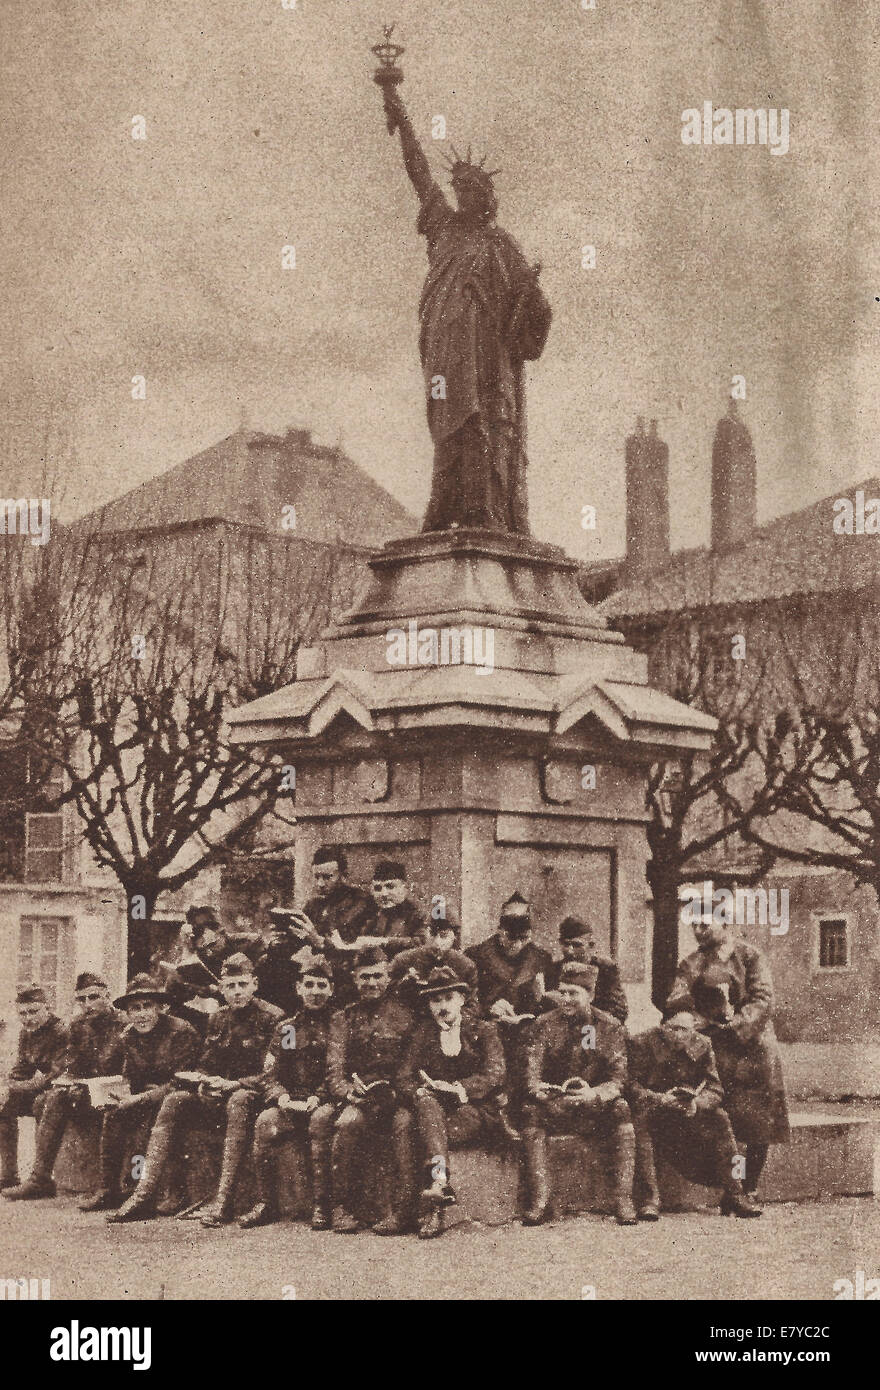 Statue of Liberty, Copy on Smaller scale of the one in NY Harbor, at Poitiers, France surrounded by soldier students, 1919 Stock Photo